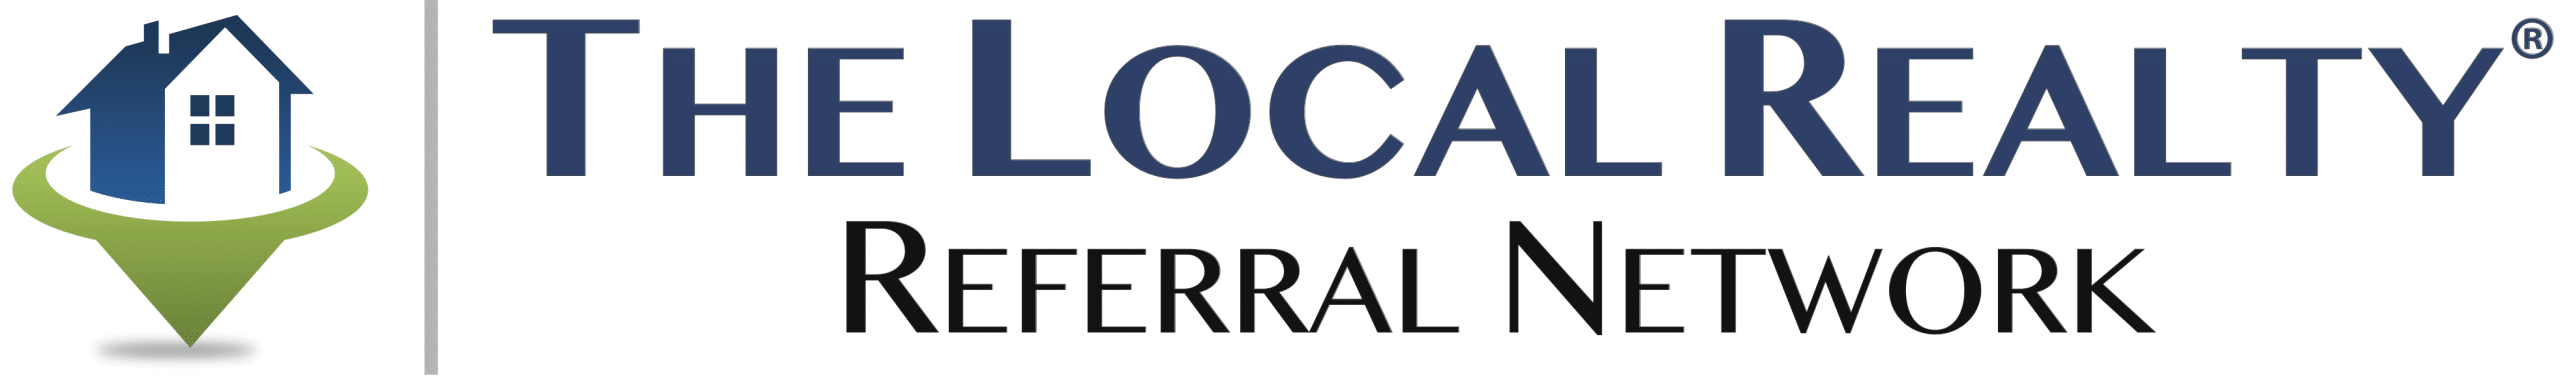 The Local Realty  Referral Network